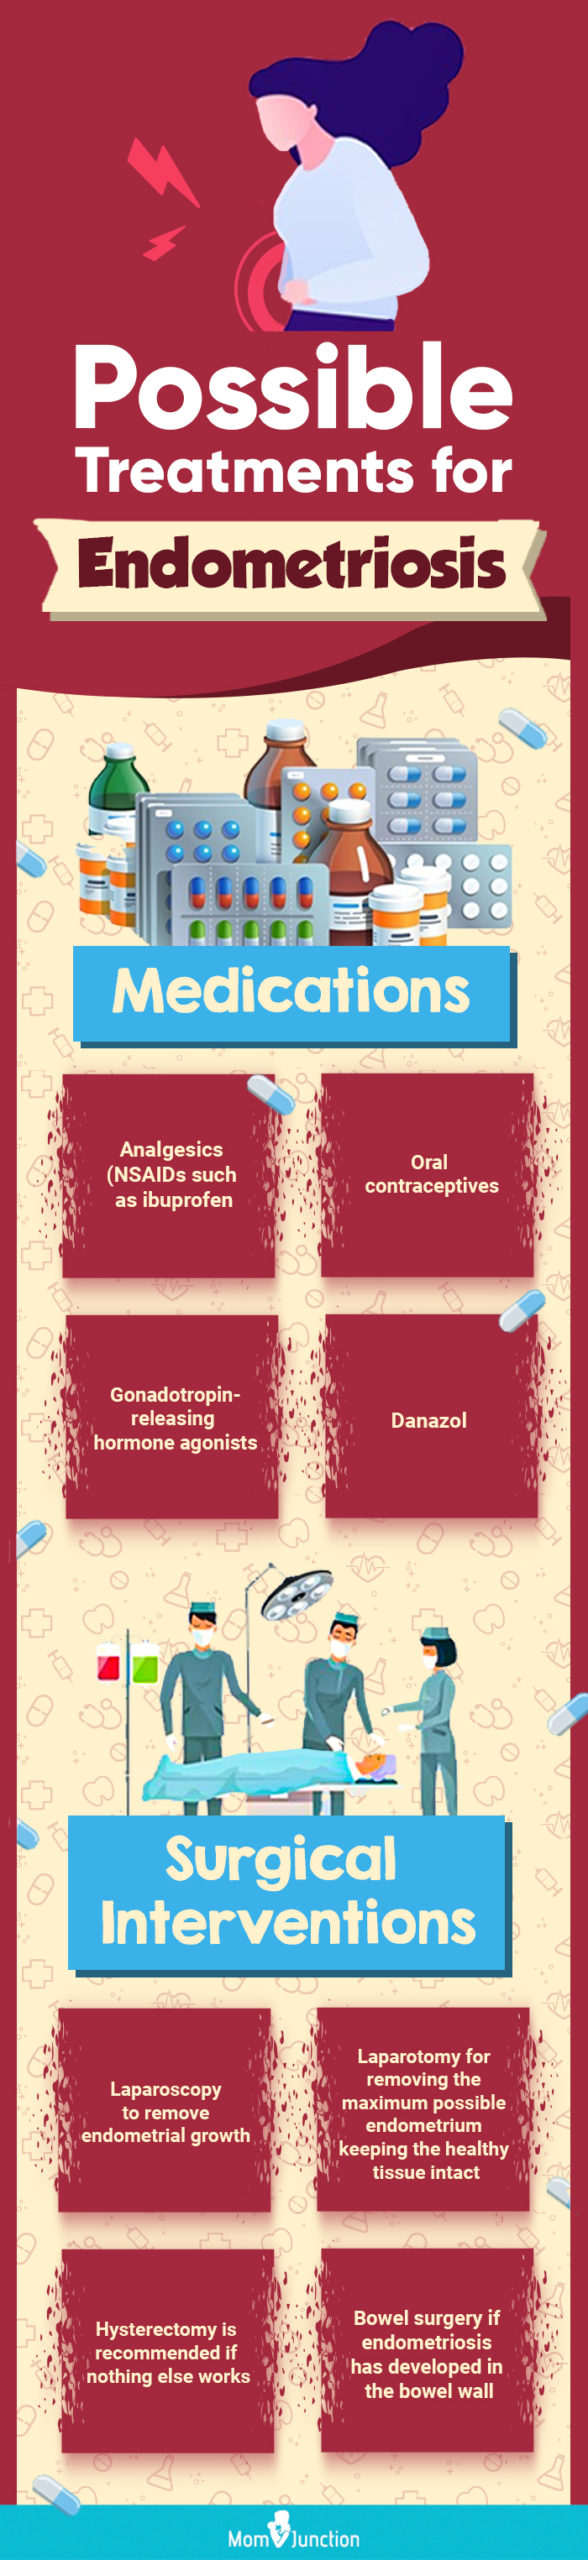 possible treatments for endometriosis (infographic)